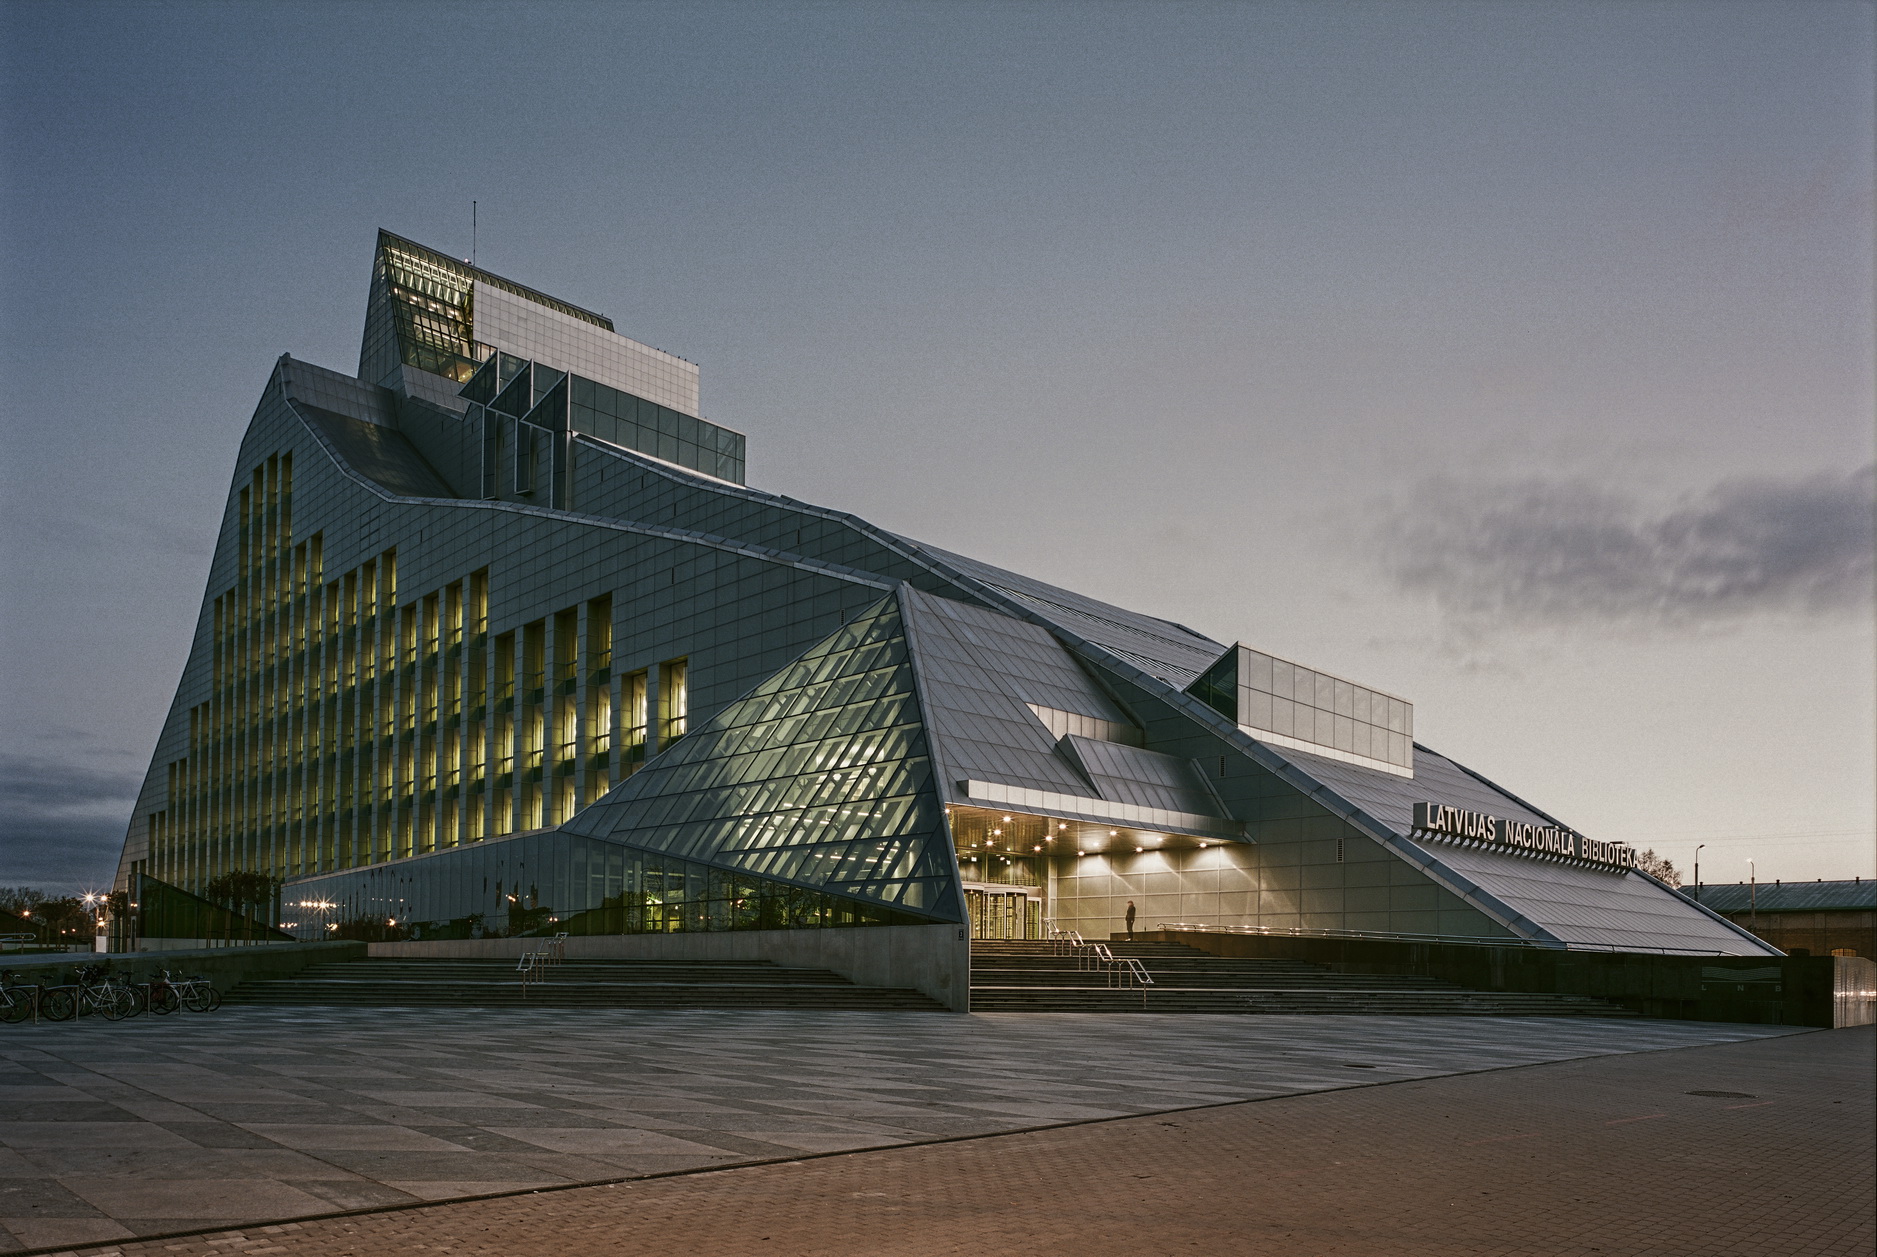 National Library of Latvia, Location of ELAG 2022; Photograph by Indrikis Sturmanis